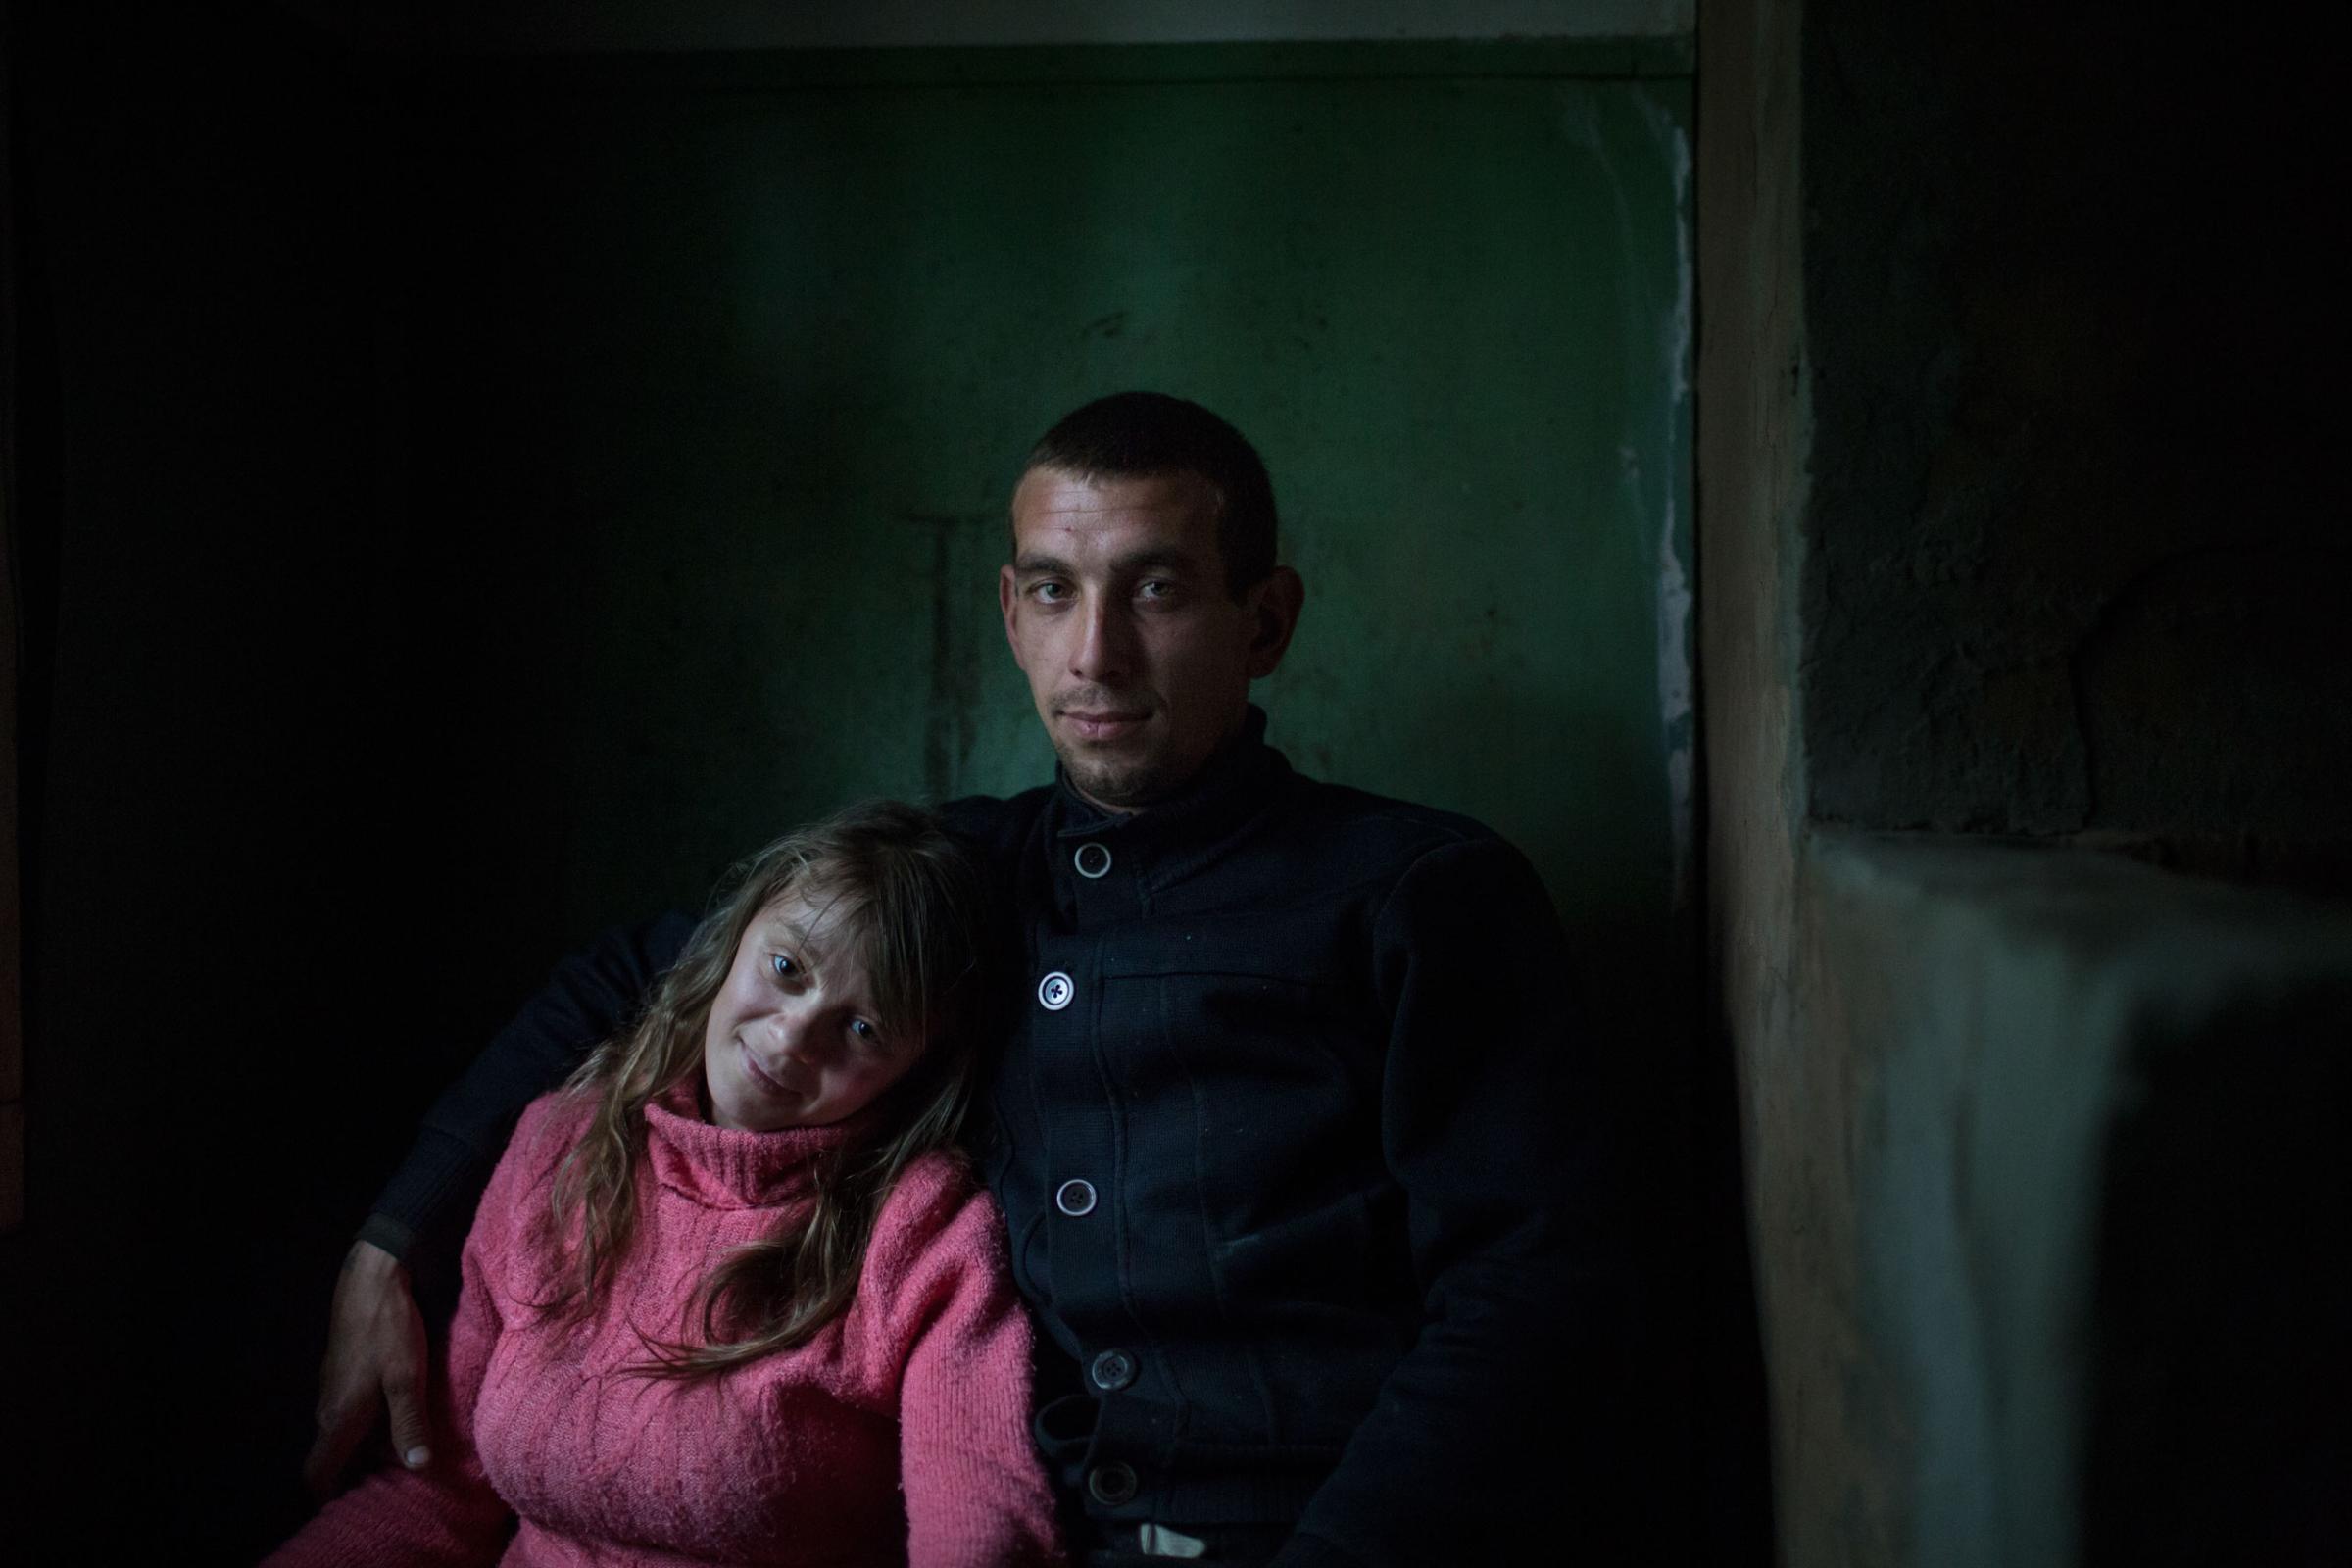 A family, Olga and Alexey Sergeev is pictured in a former Soviet river dispatching office i Ust-Vologodskoye. Alexey is a worker at local businessman Alexander Zheltov's (an owner of local river fleet and ports) company